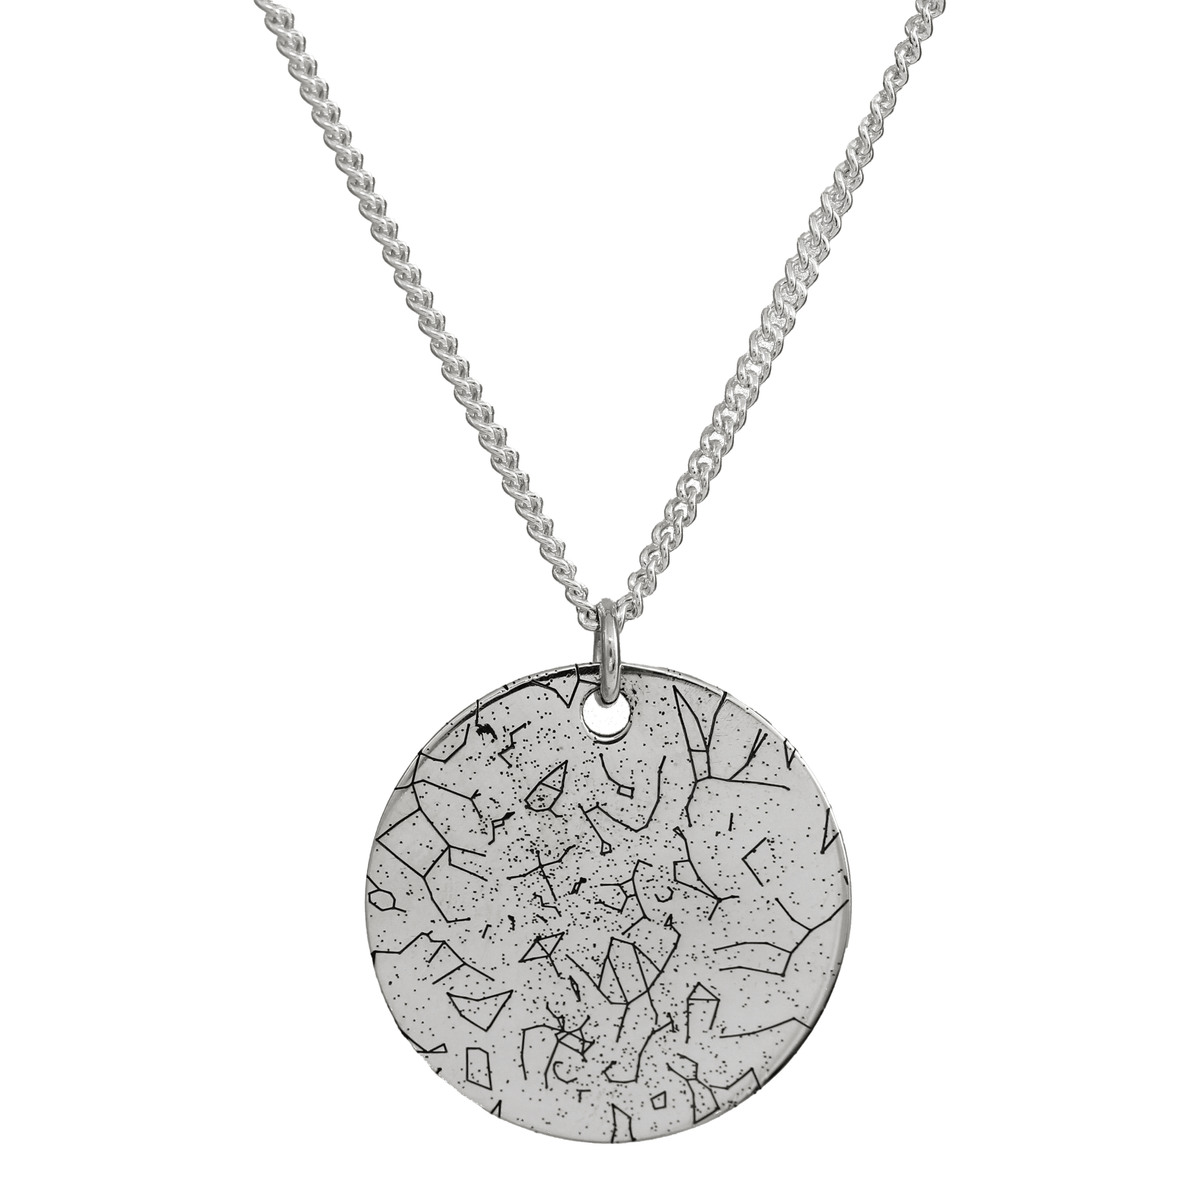 Bespoke Star Map Constellation Necklace - 25mm Disc